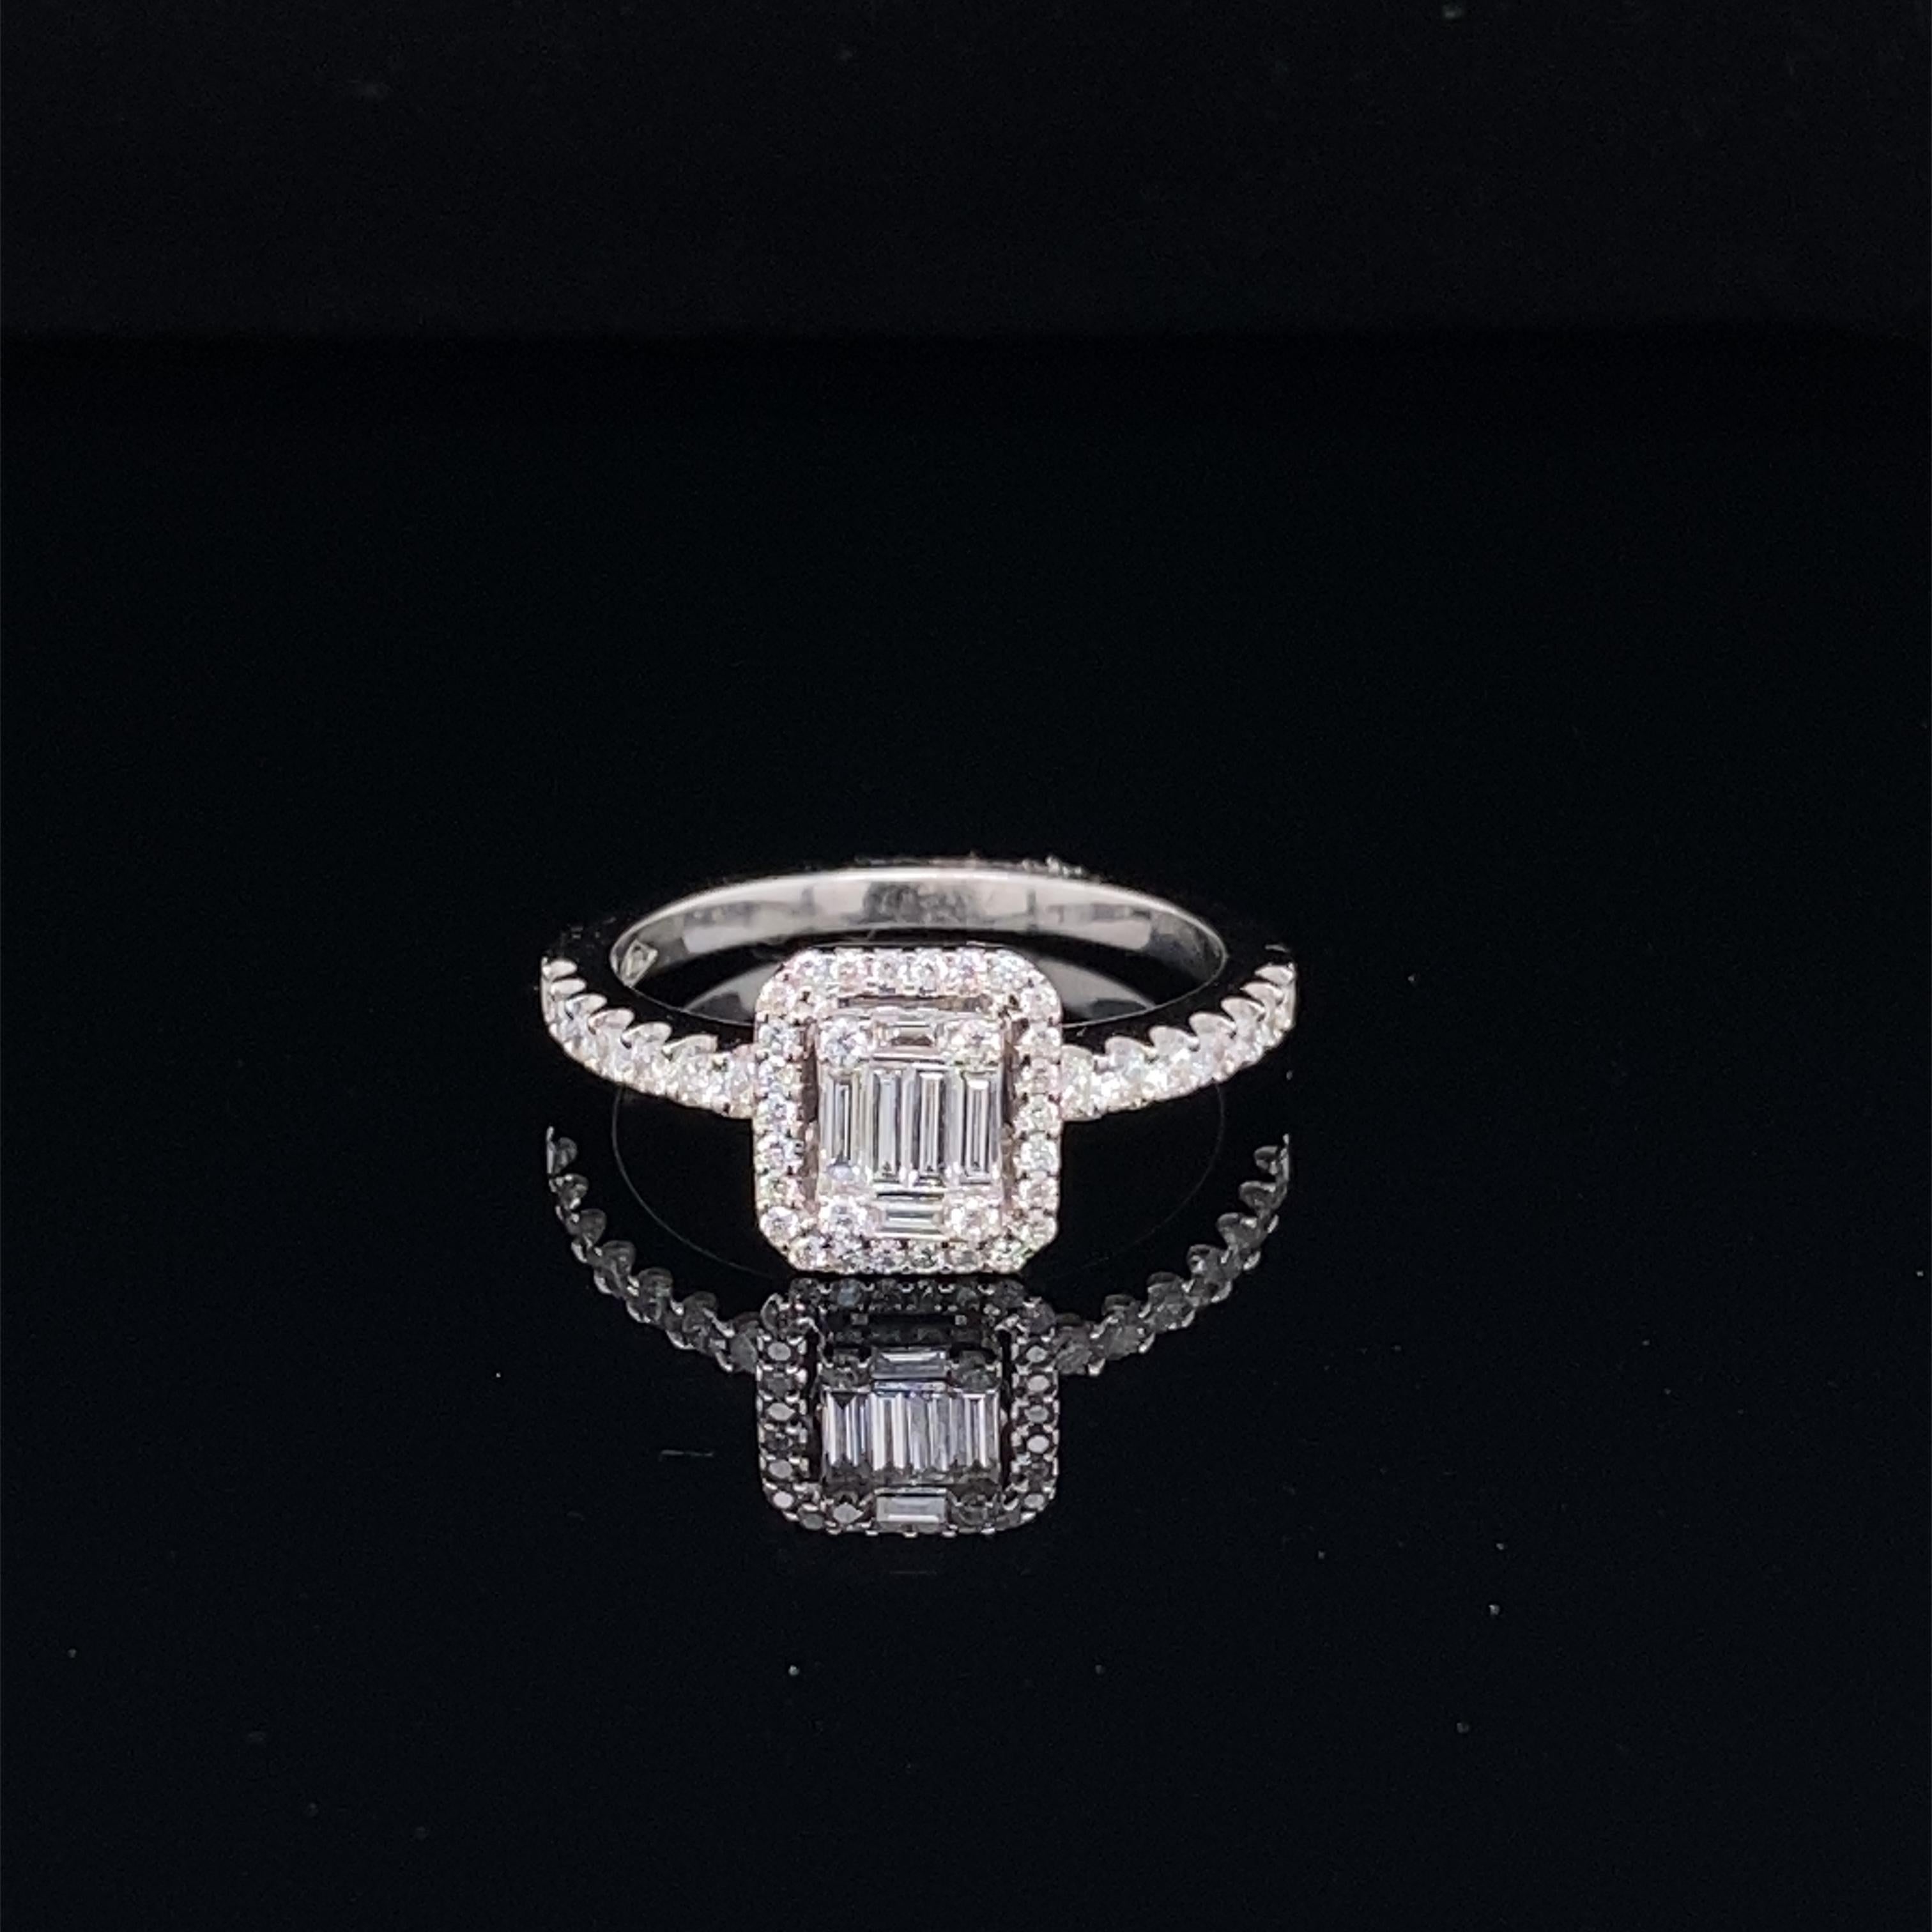 This stunning ring features a beautiful Emerald Cut Cluster of White Diamonds comprising of Baguette and Round Diamonds, surrounded by a Diamond Halo. The Diamond Cluster sits on a Diamond Shank. This ring is set in 18K White Gold.
Total Diamond